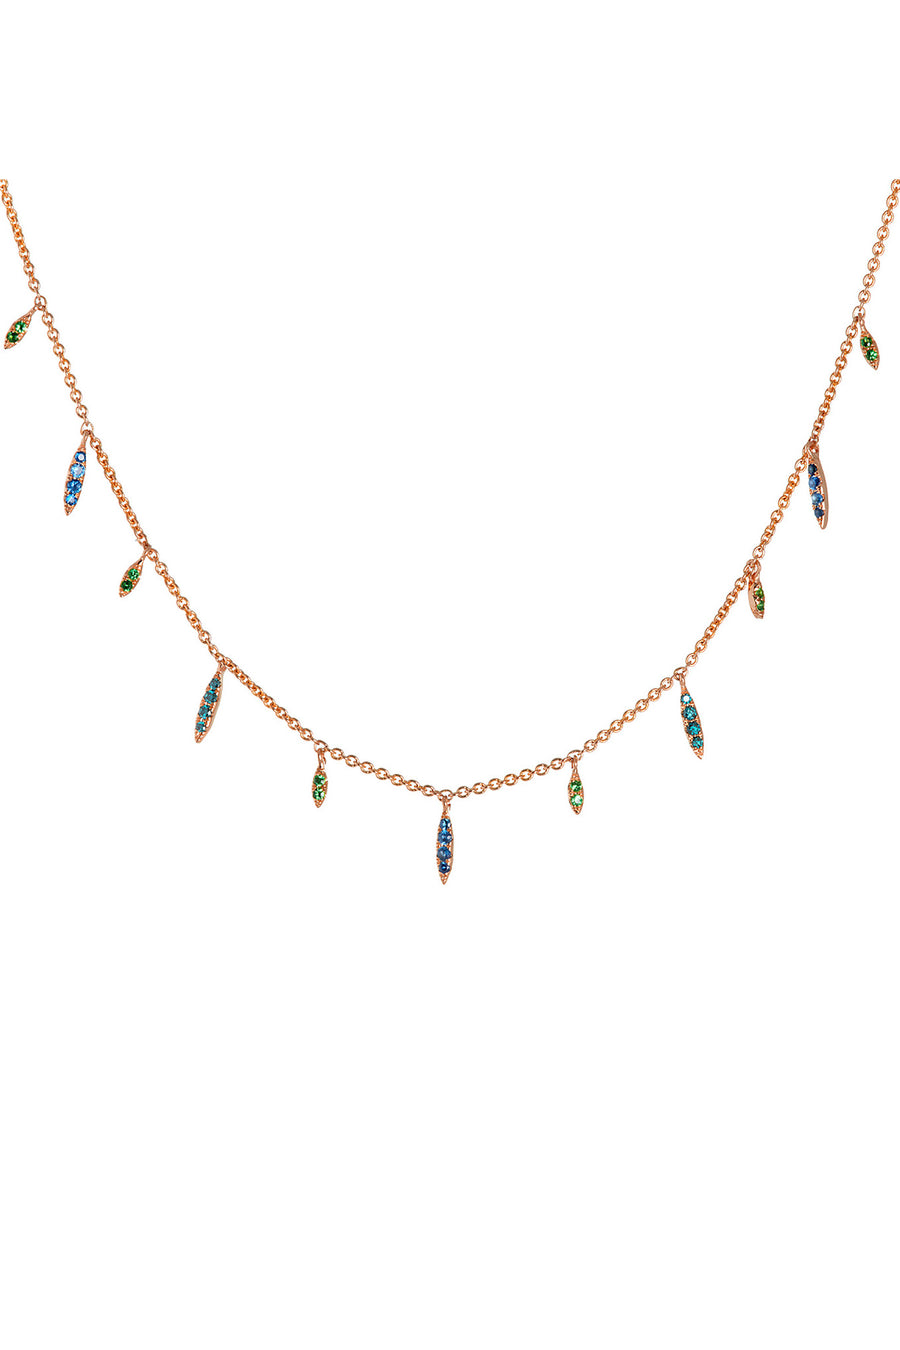 Multi-diamond dangle necklace in 14k gold and blue and green sapphires